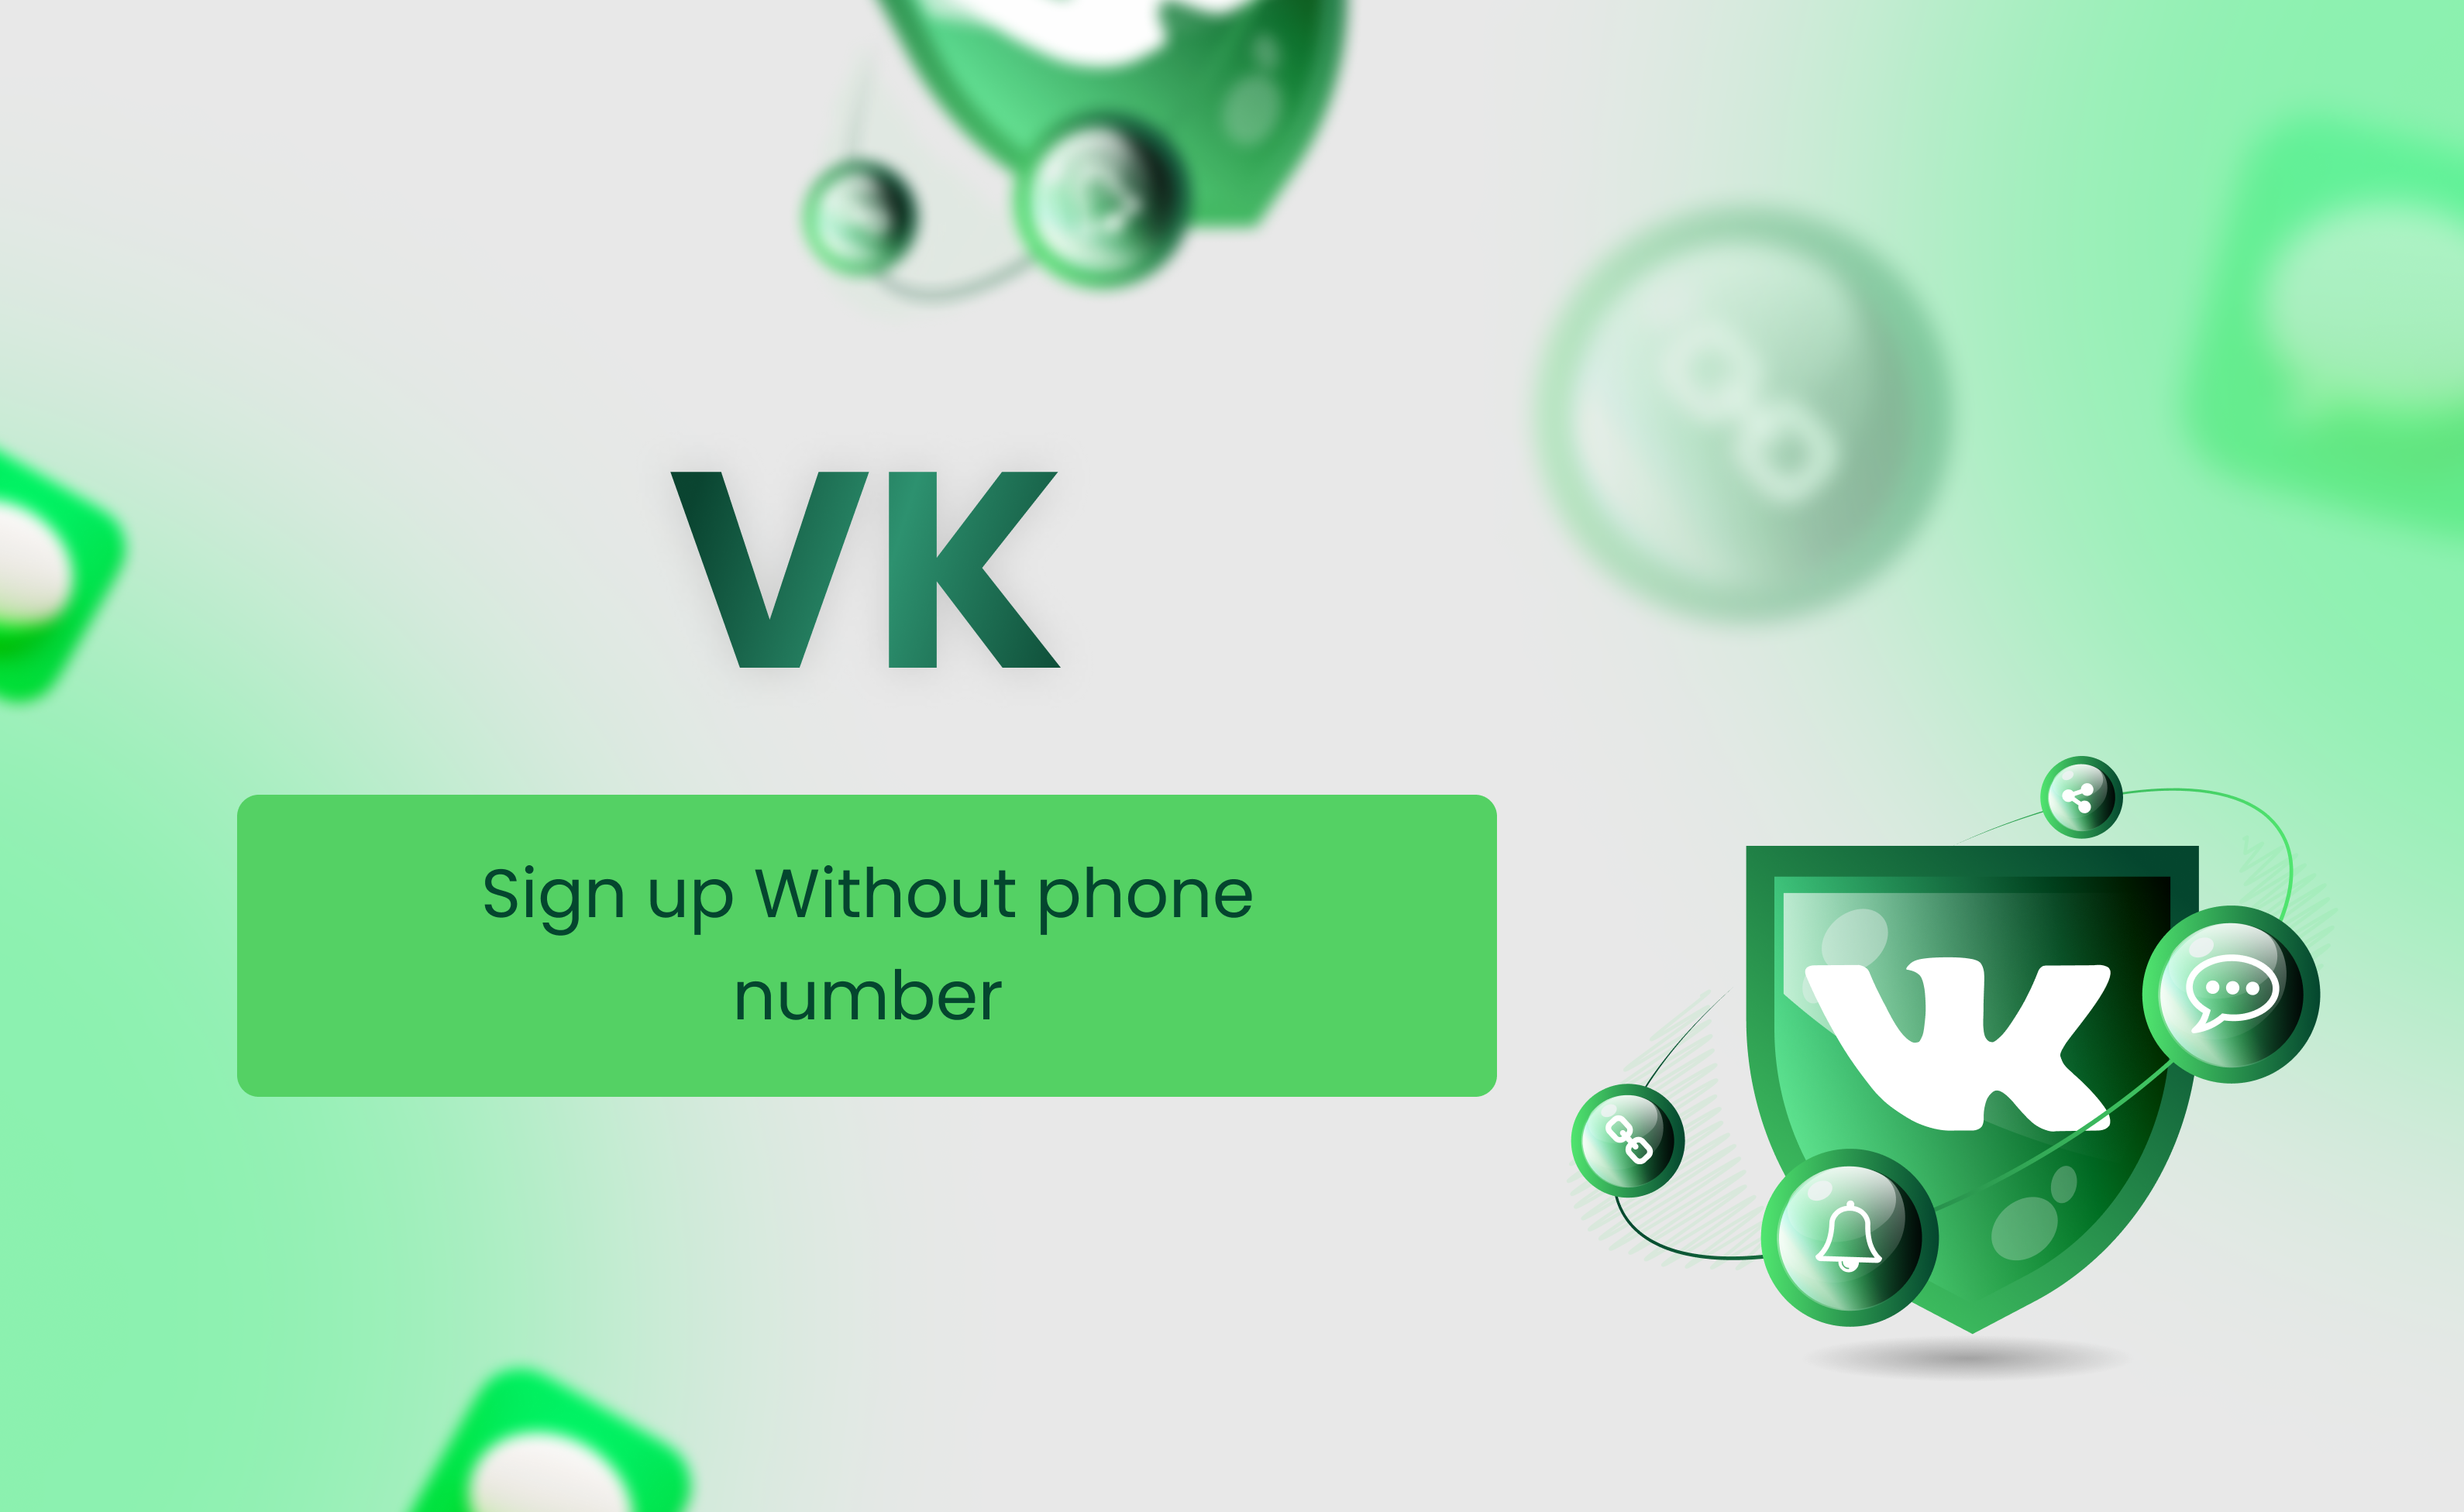 Sign Up VK Without a Phone Number Easily with SMSBOWER